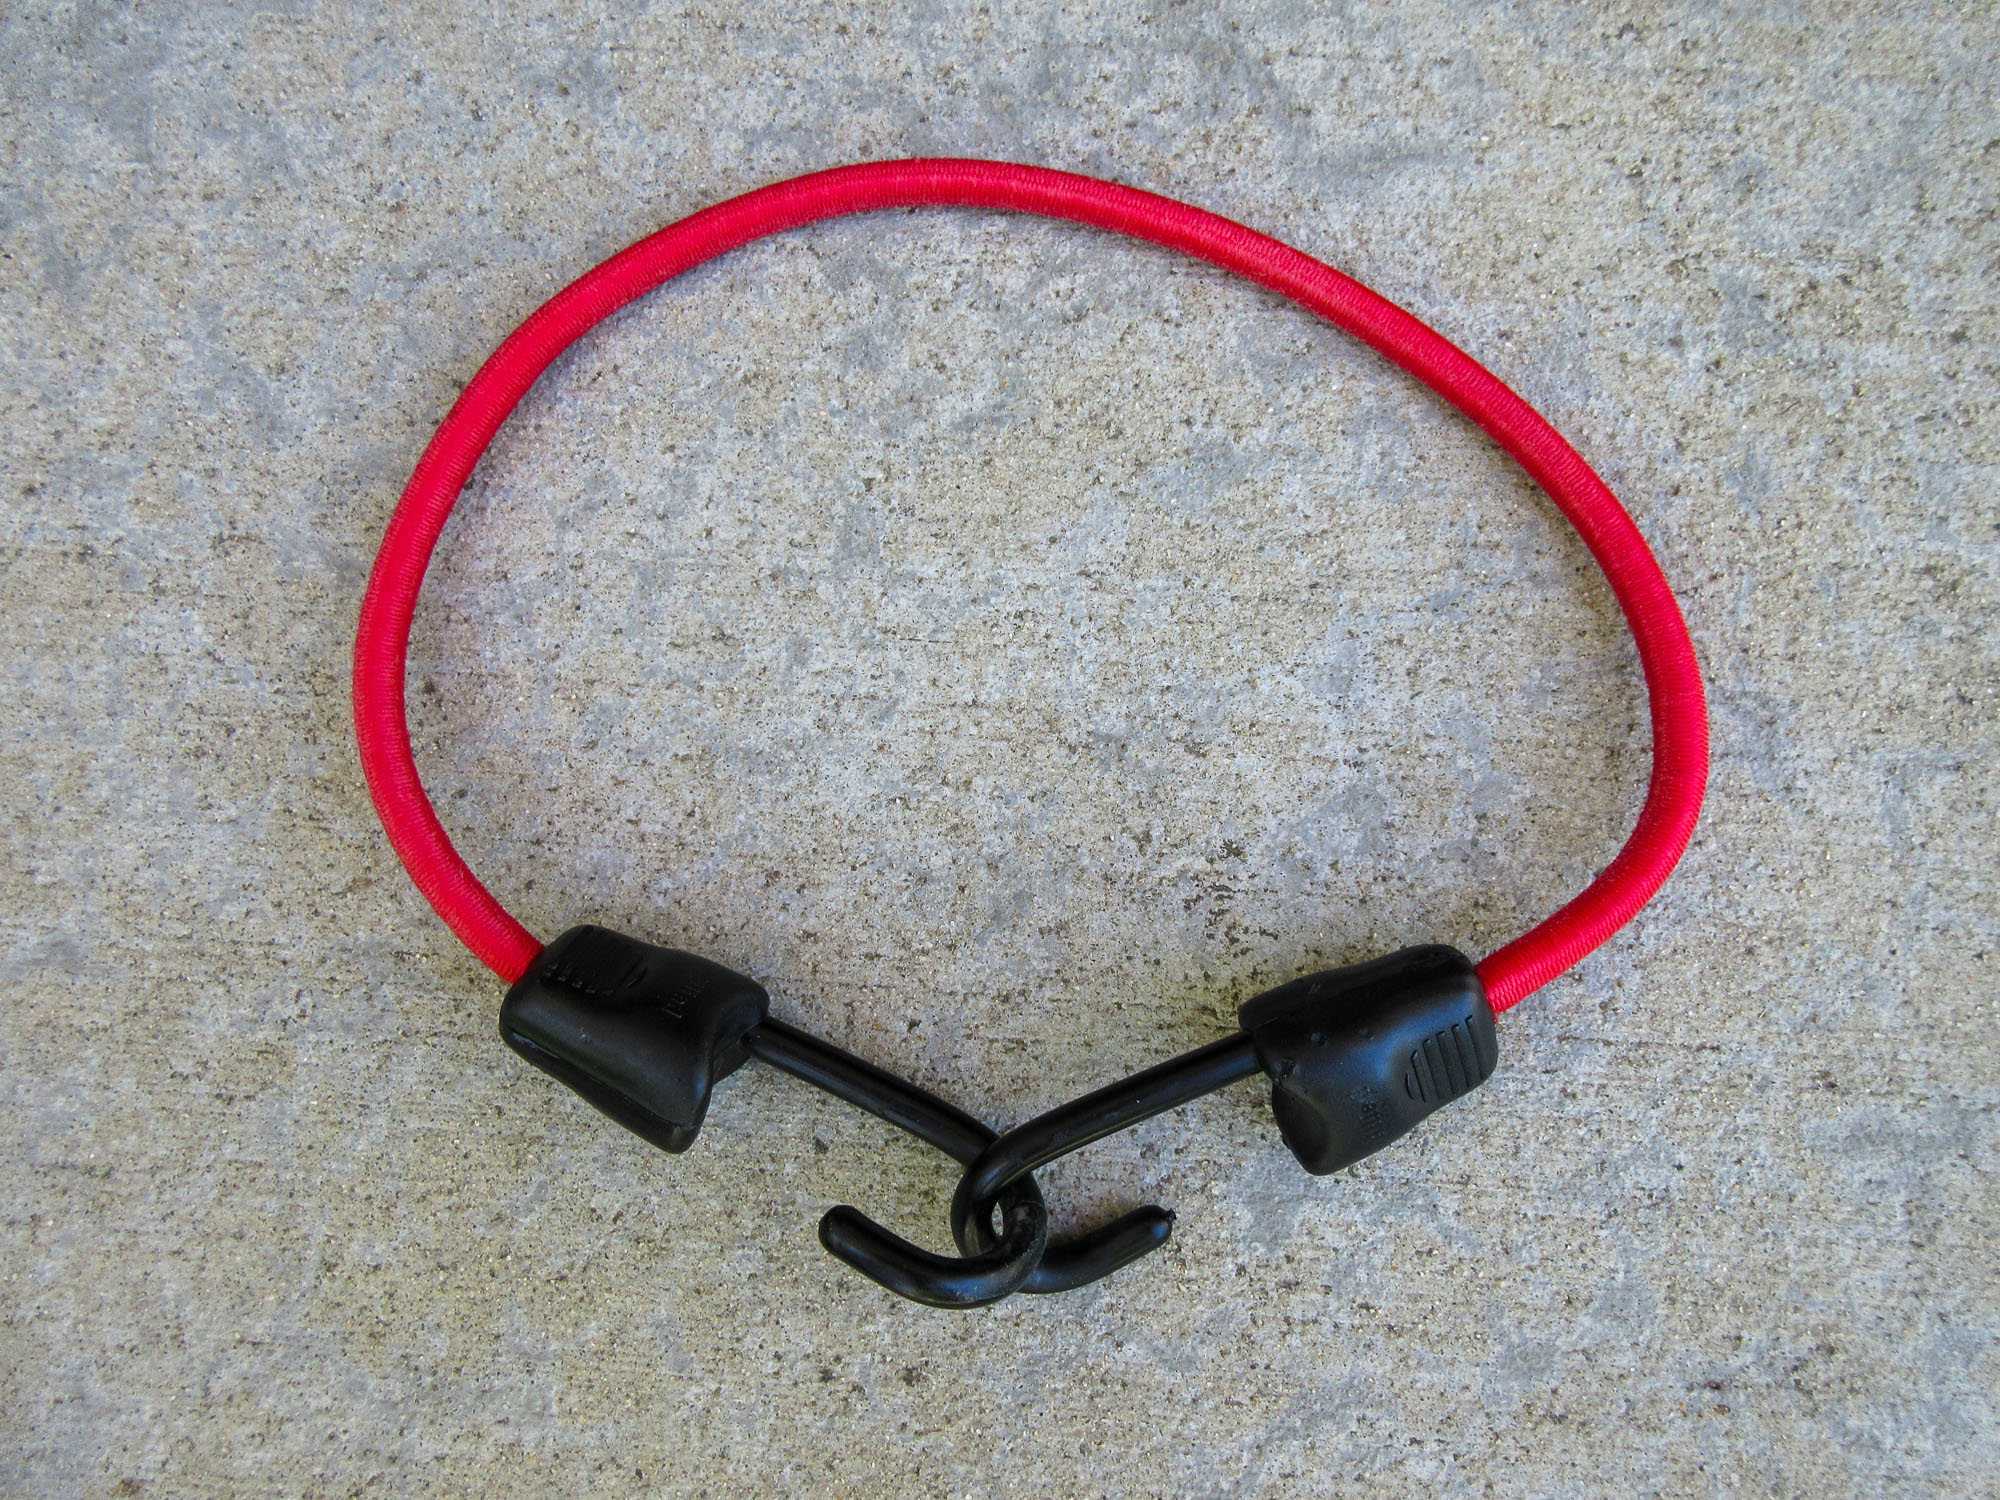 Brand-new-looking red bungee cord